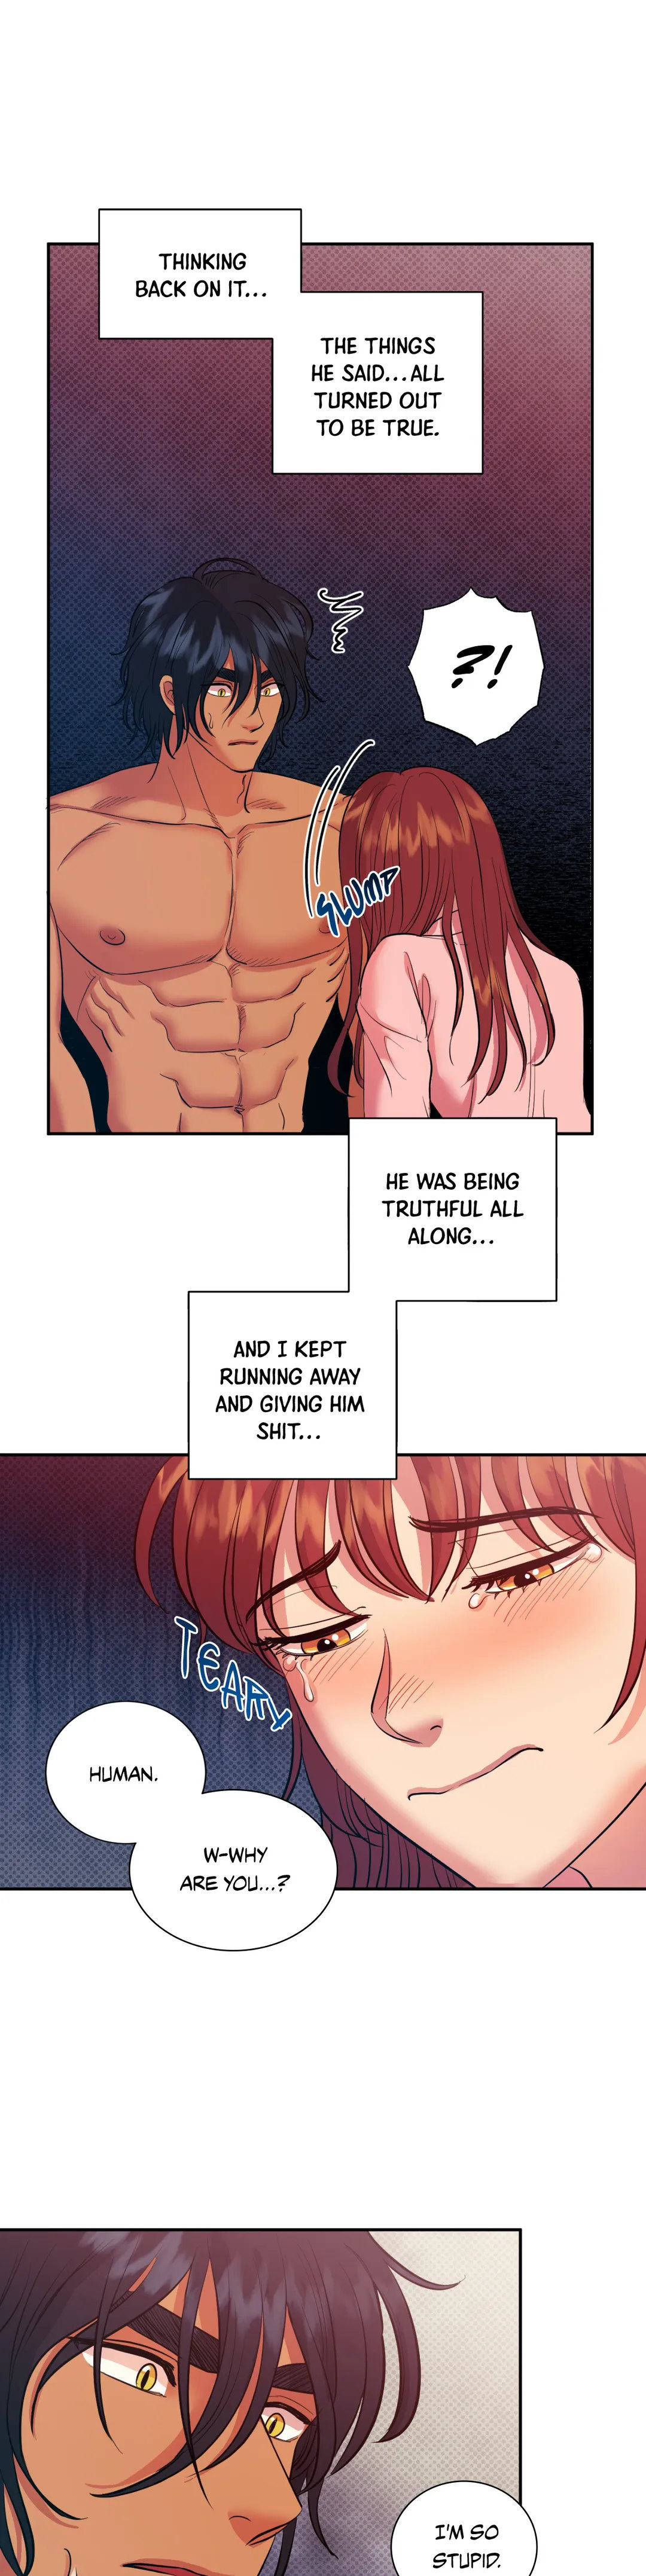 Hana’s Demons of Lust - Chapter 12 Page 20